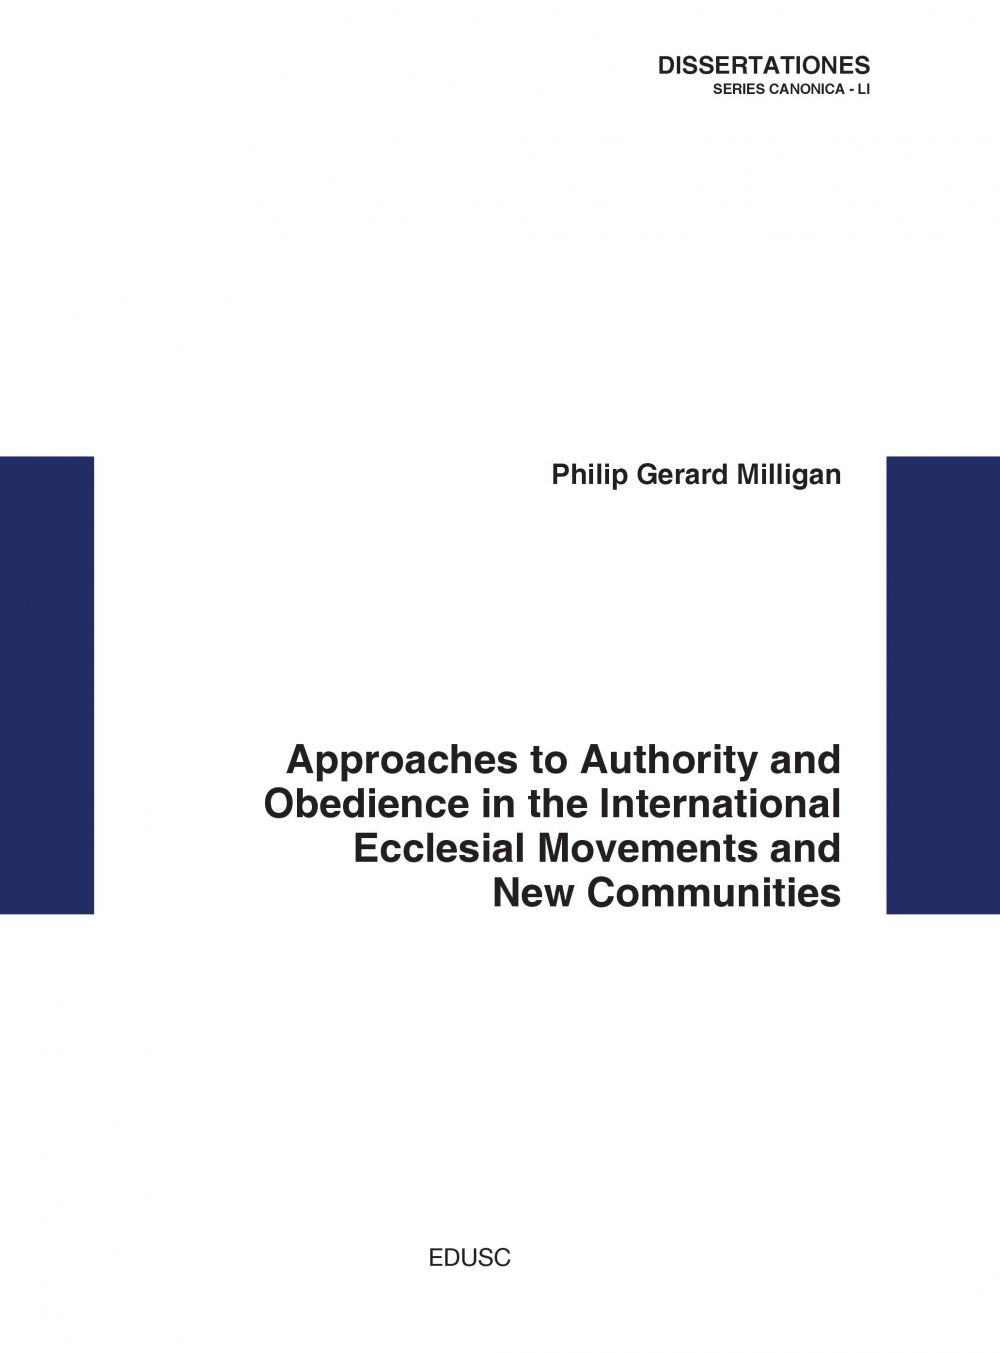 Approaches to Authority and Obedience in the International Ecclesial Movements and New Communities - Librerie.coop